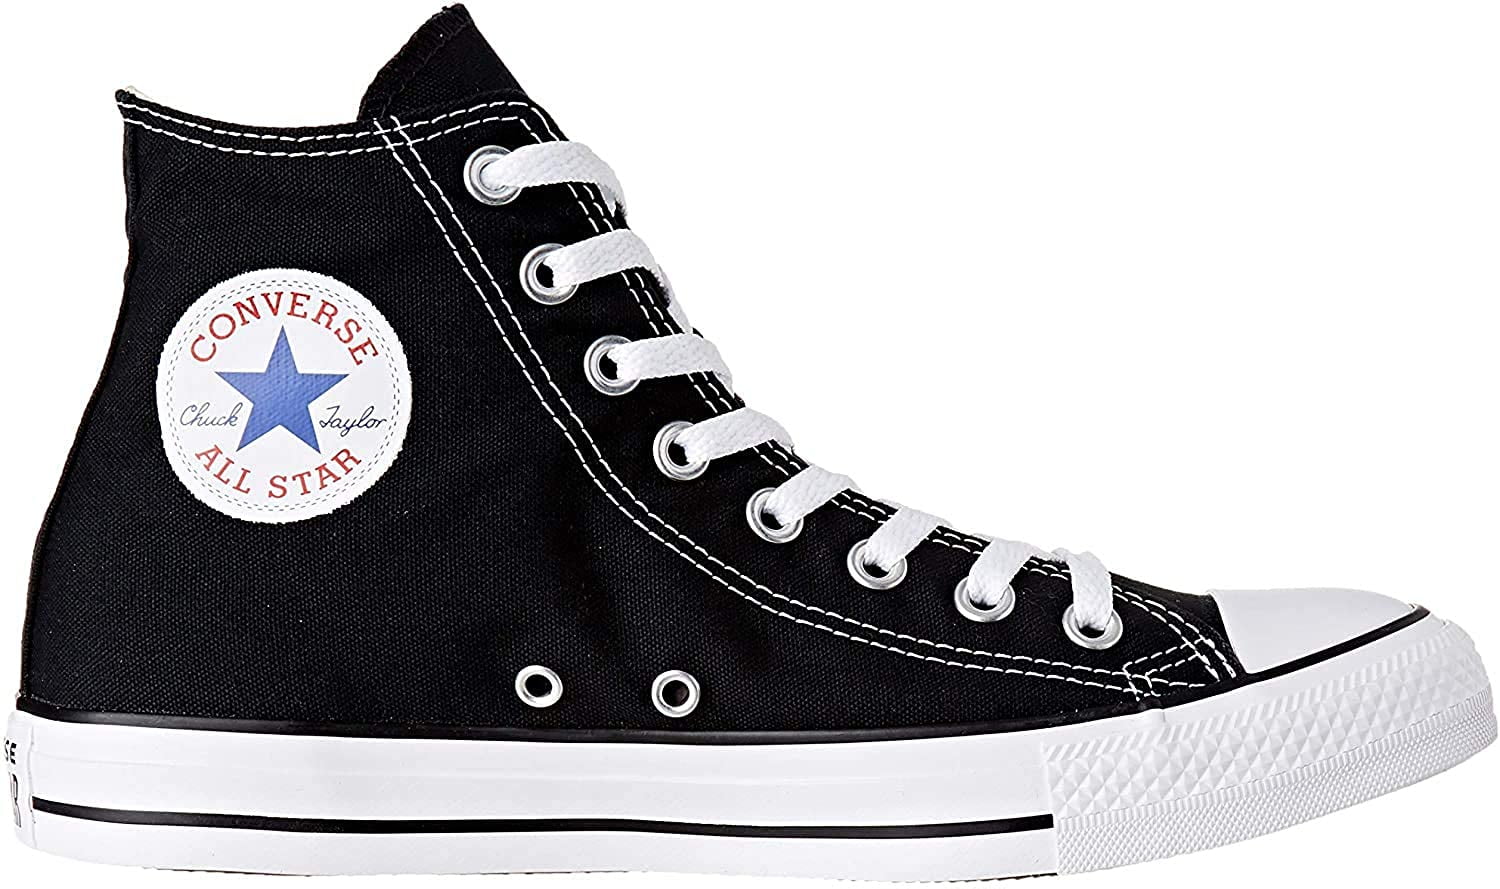 Converse Chuck Taylor All Star Shoes (M9160) Hi Top in Black, Size: 14 ...